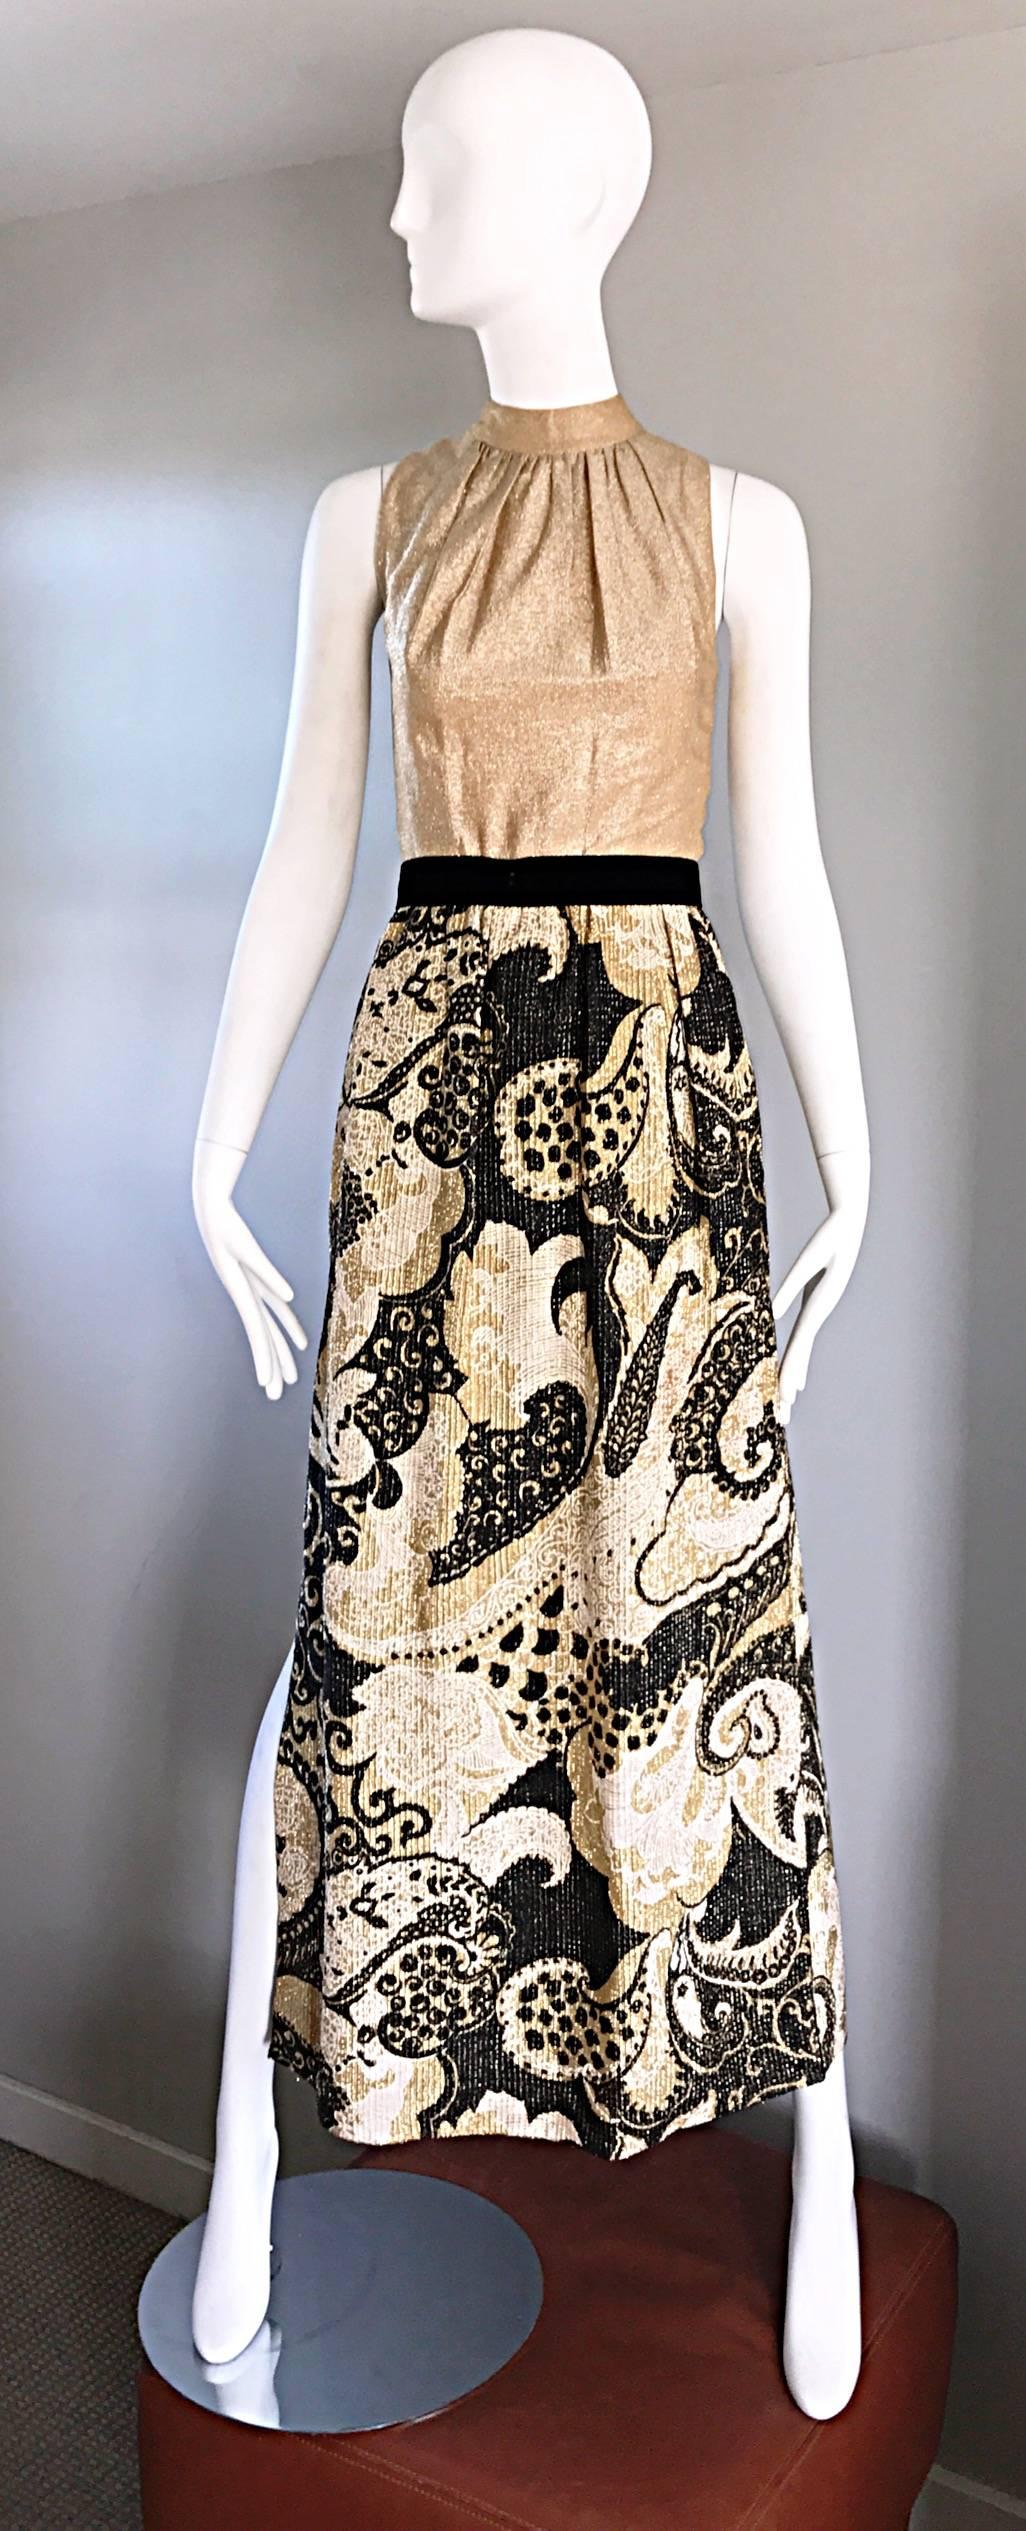 Incredible 1970s vintage gold and black metallic Lurex maxi dress / romper / jumpsuit with attached hot pants (shorts) underneath. Fitted gold bodice, with a high pleated neck. Attached black silk velvet belt. Wild gold and black batik printed full